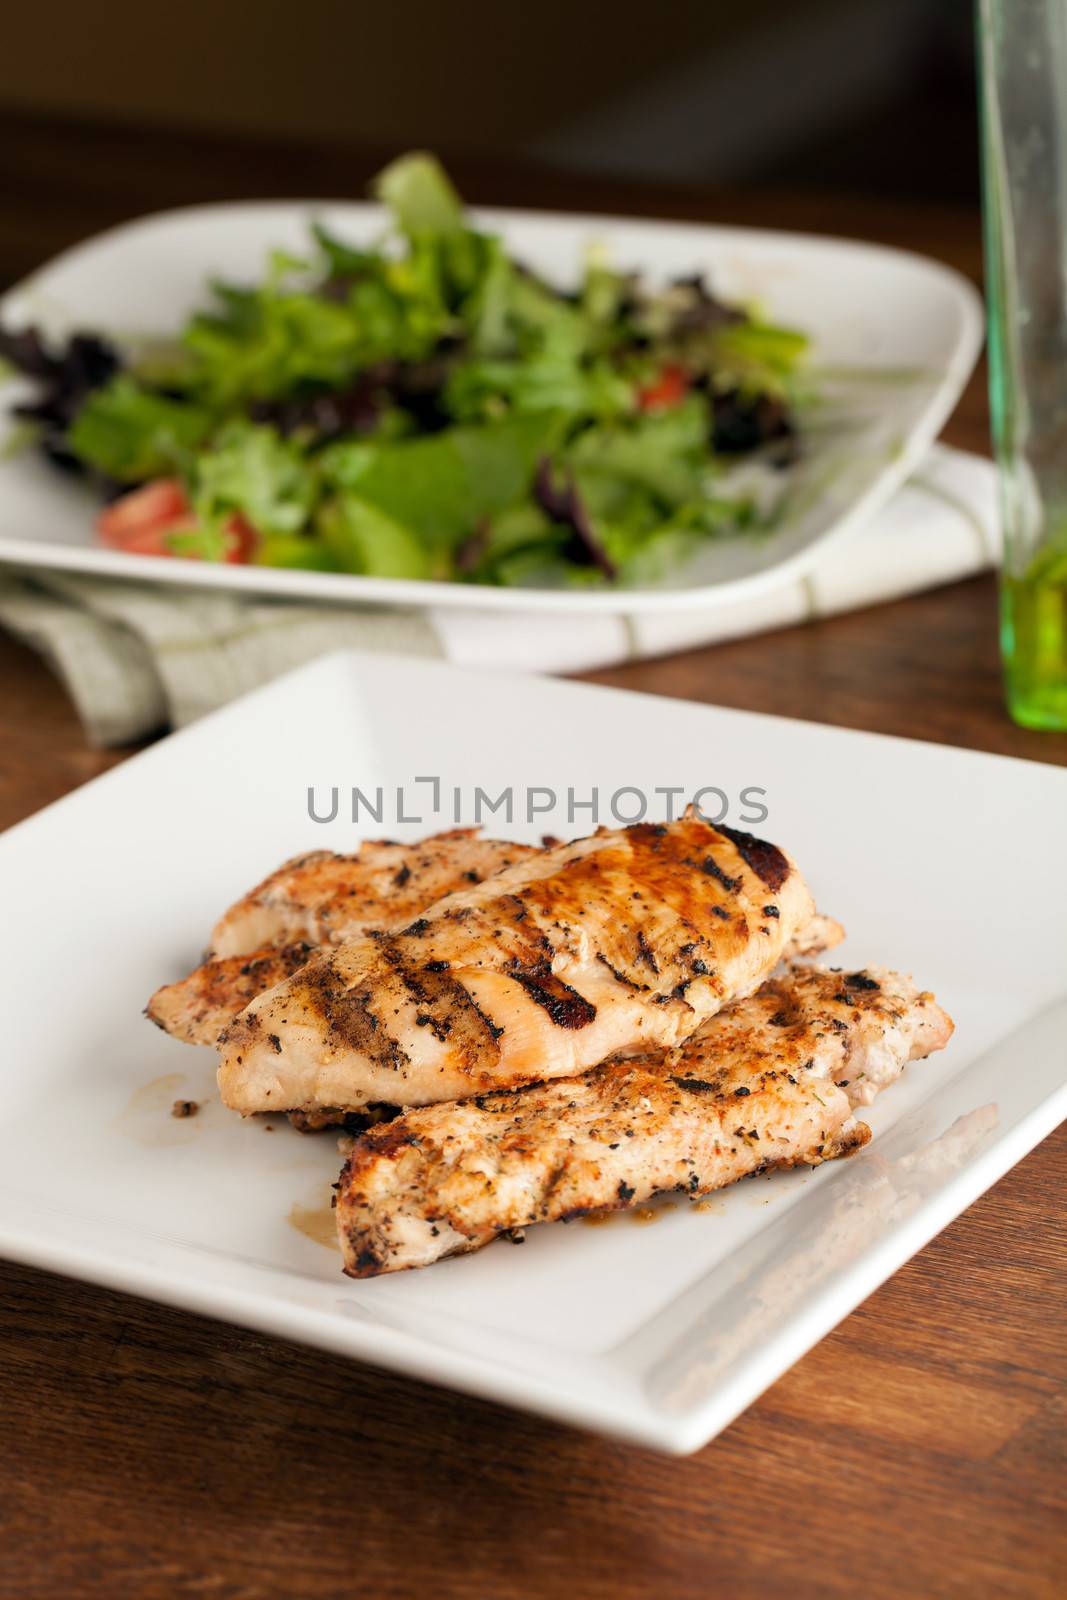 Grilled Chicken and Salad by graficallyminded